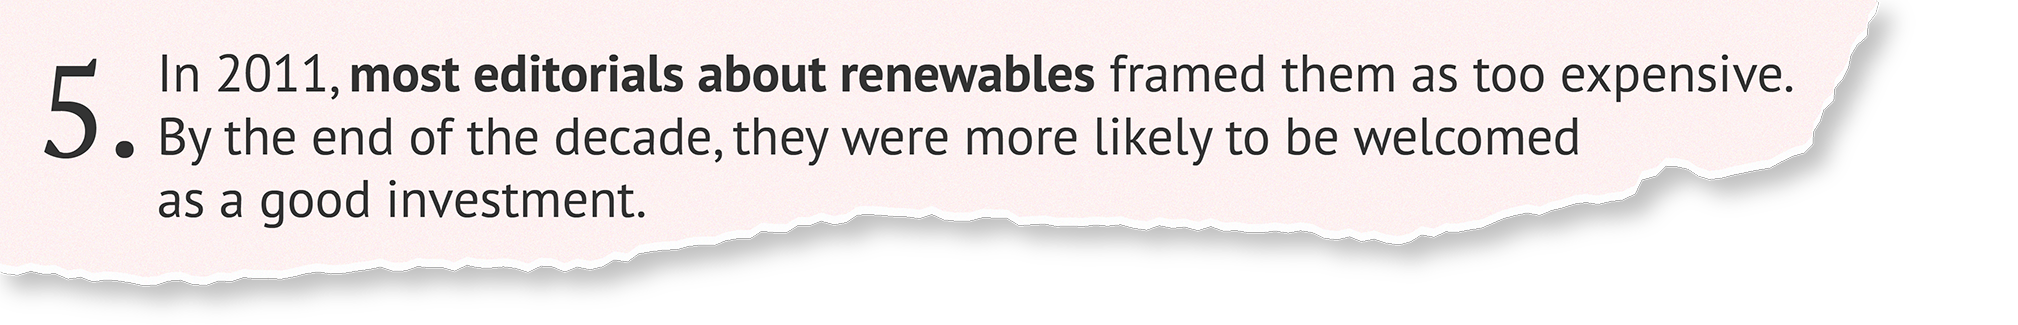 In 2011, most editorials about renewables framed them as too expensive. By the end of the decade, they were more likely to be welcomed as a good investment.